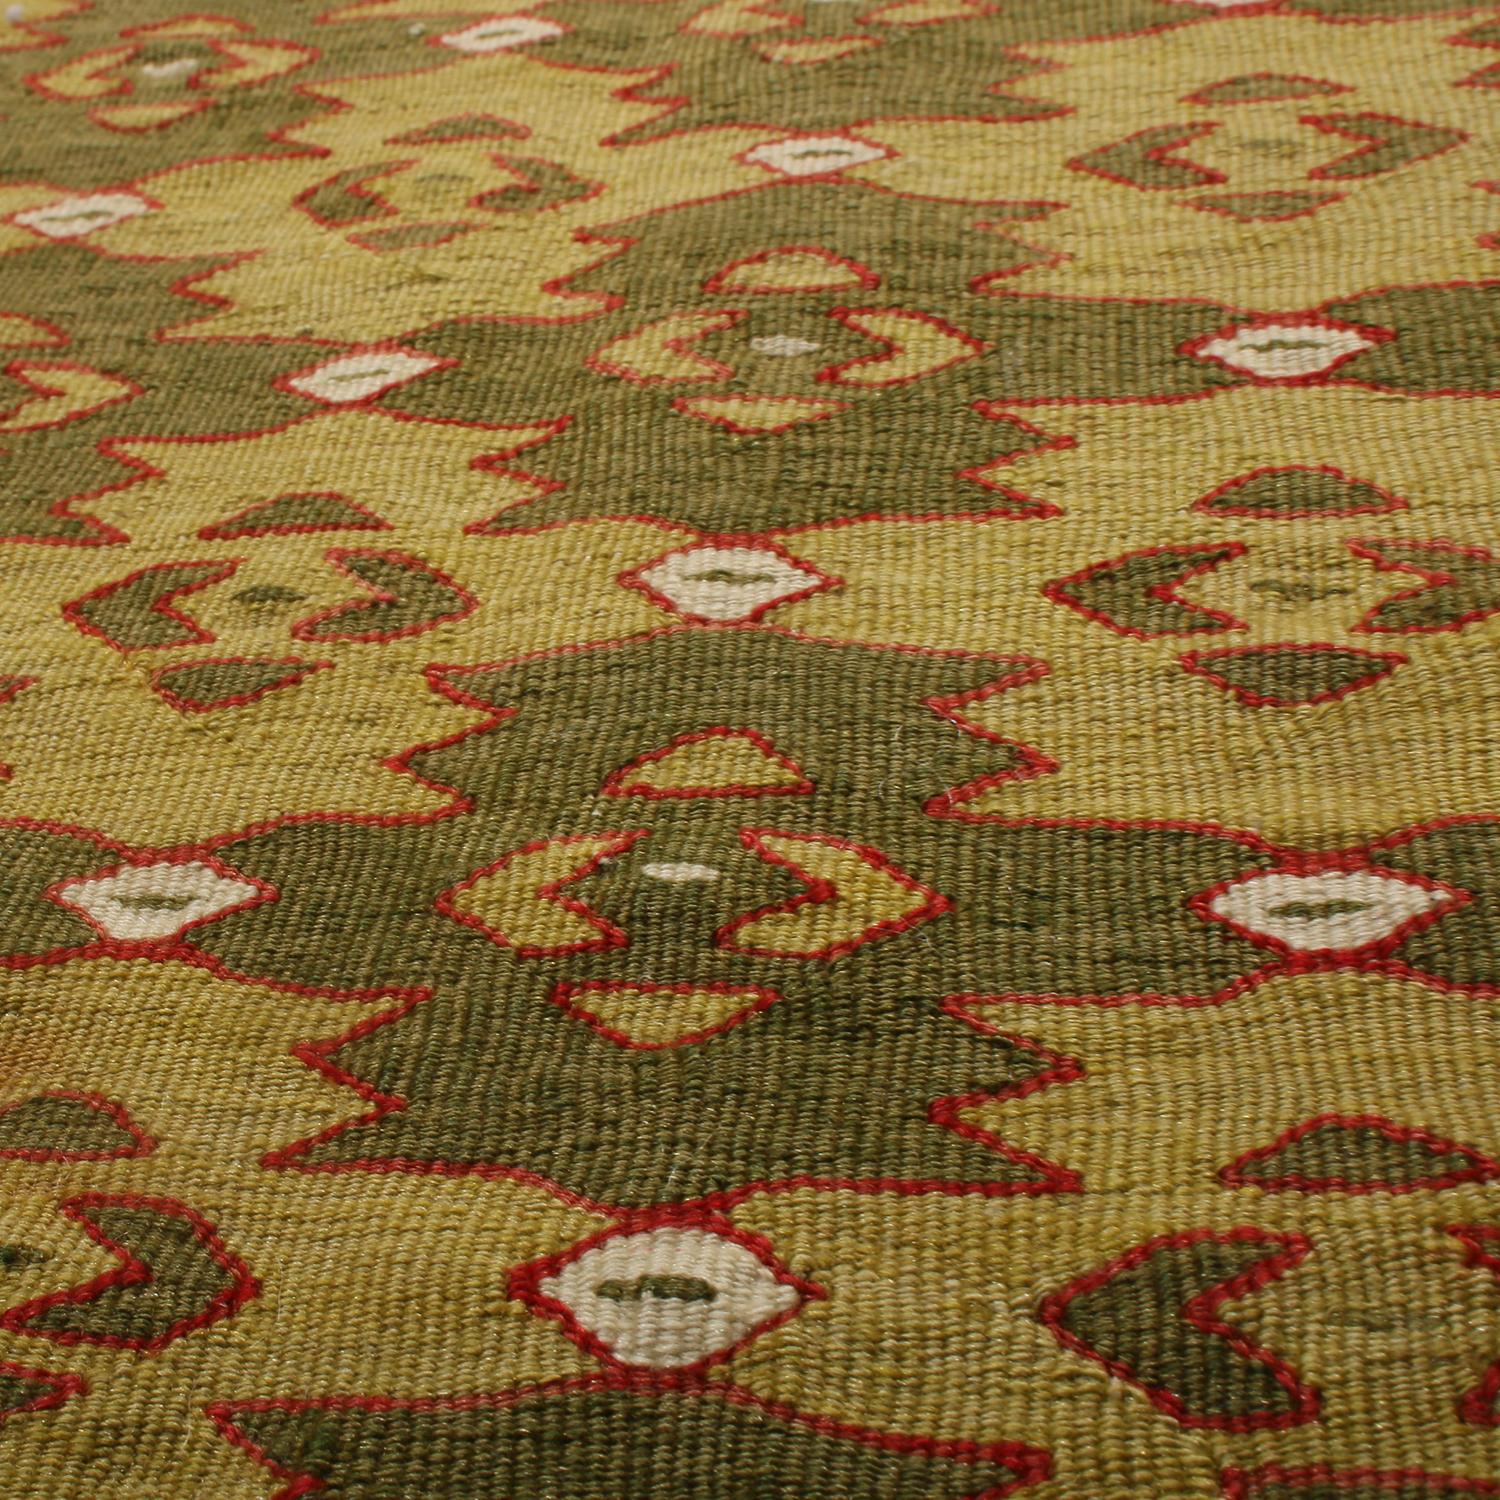 Vintage Midcentury Sarkoy Beige-Brown and Green Wool Kilim Rug by Rug & Kilim In Good Condition For Sale In Long Island City, NY